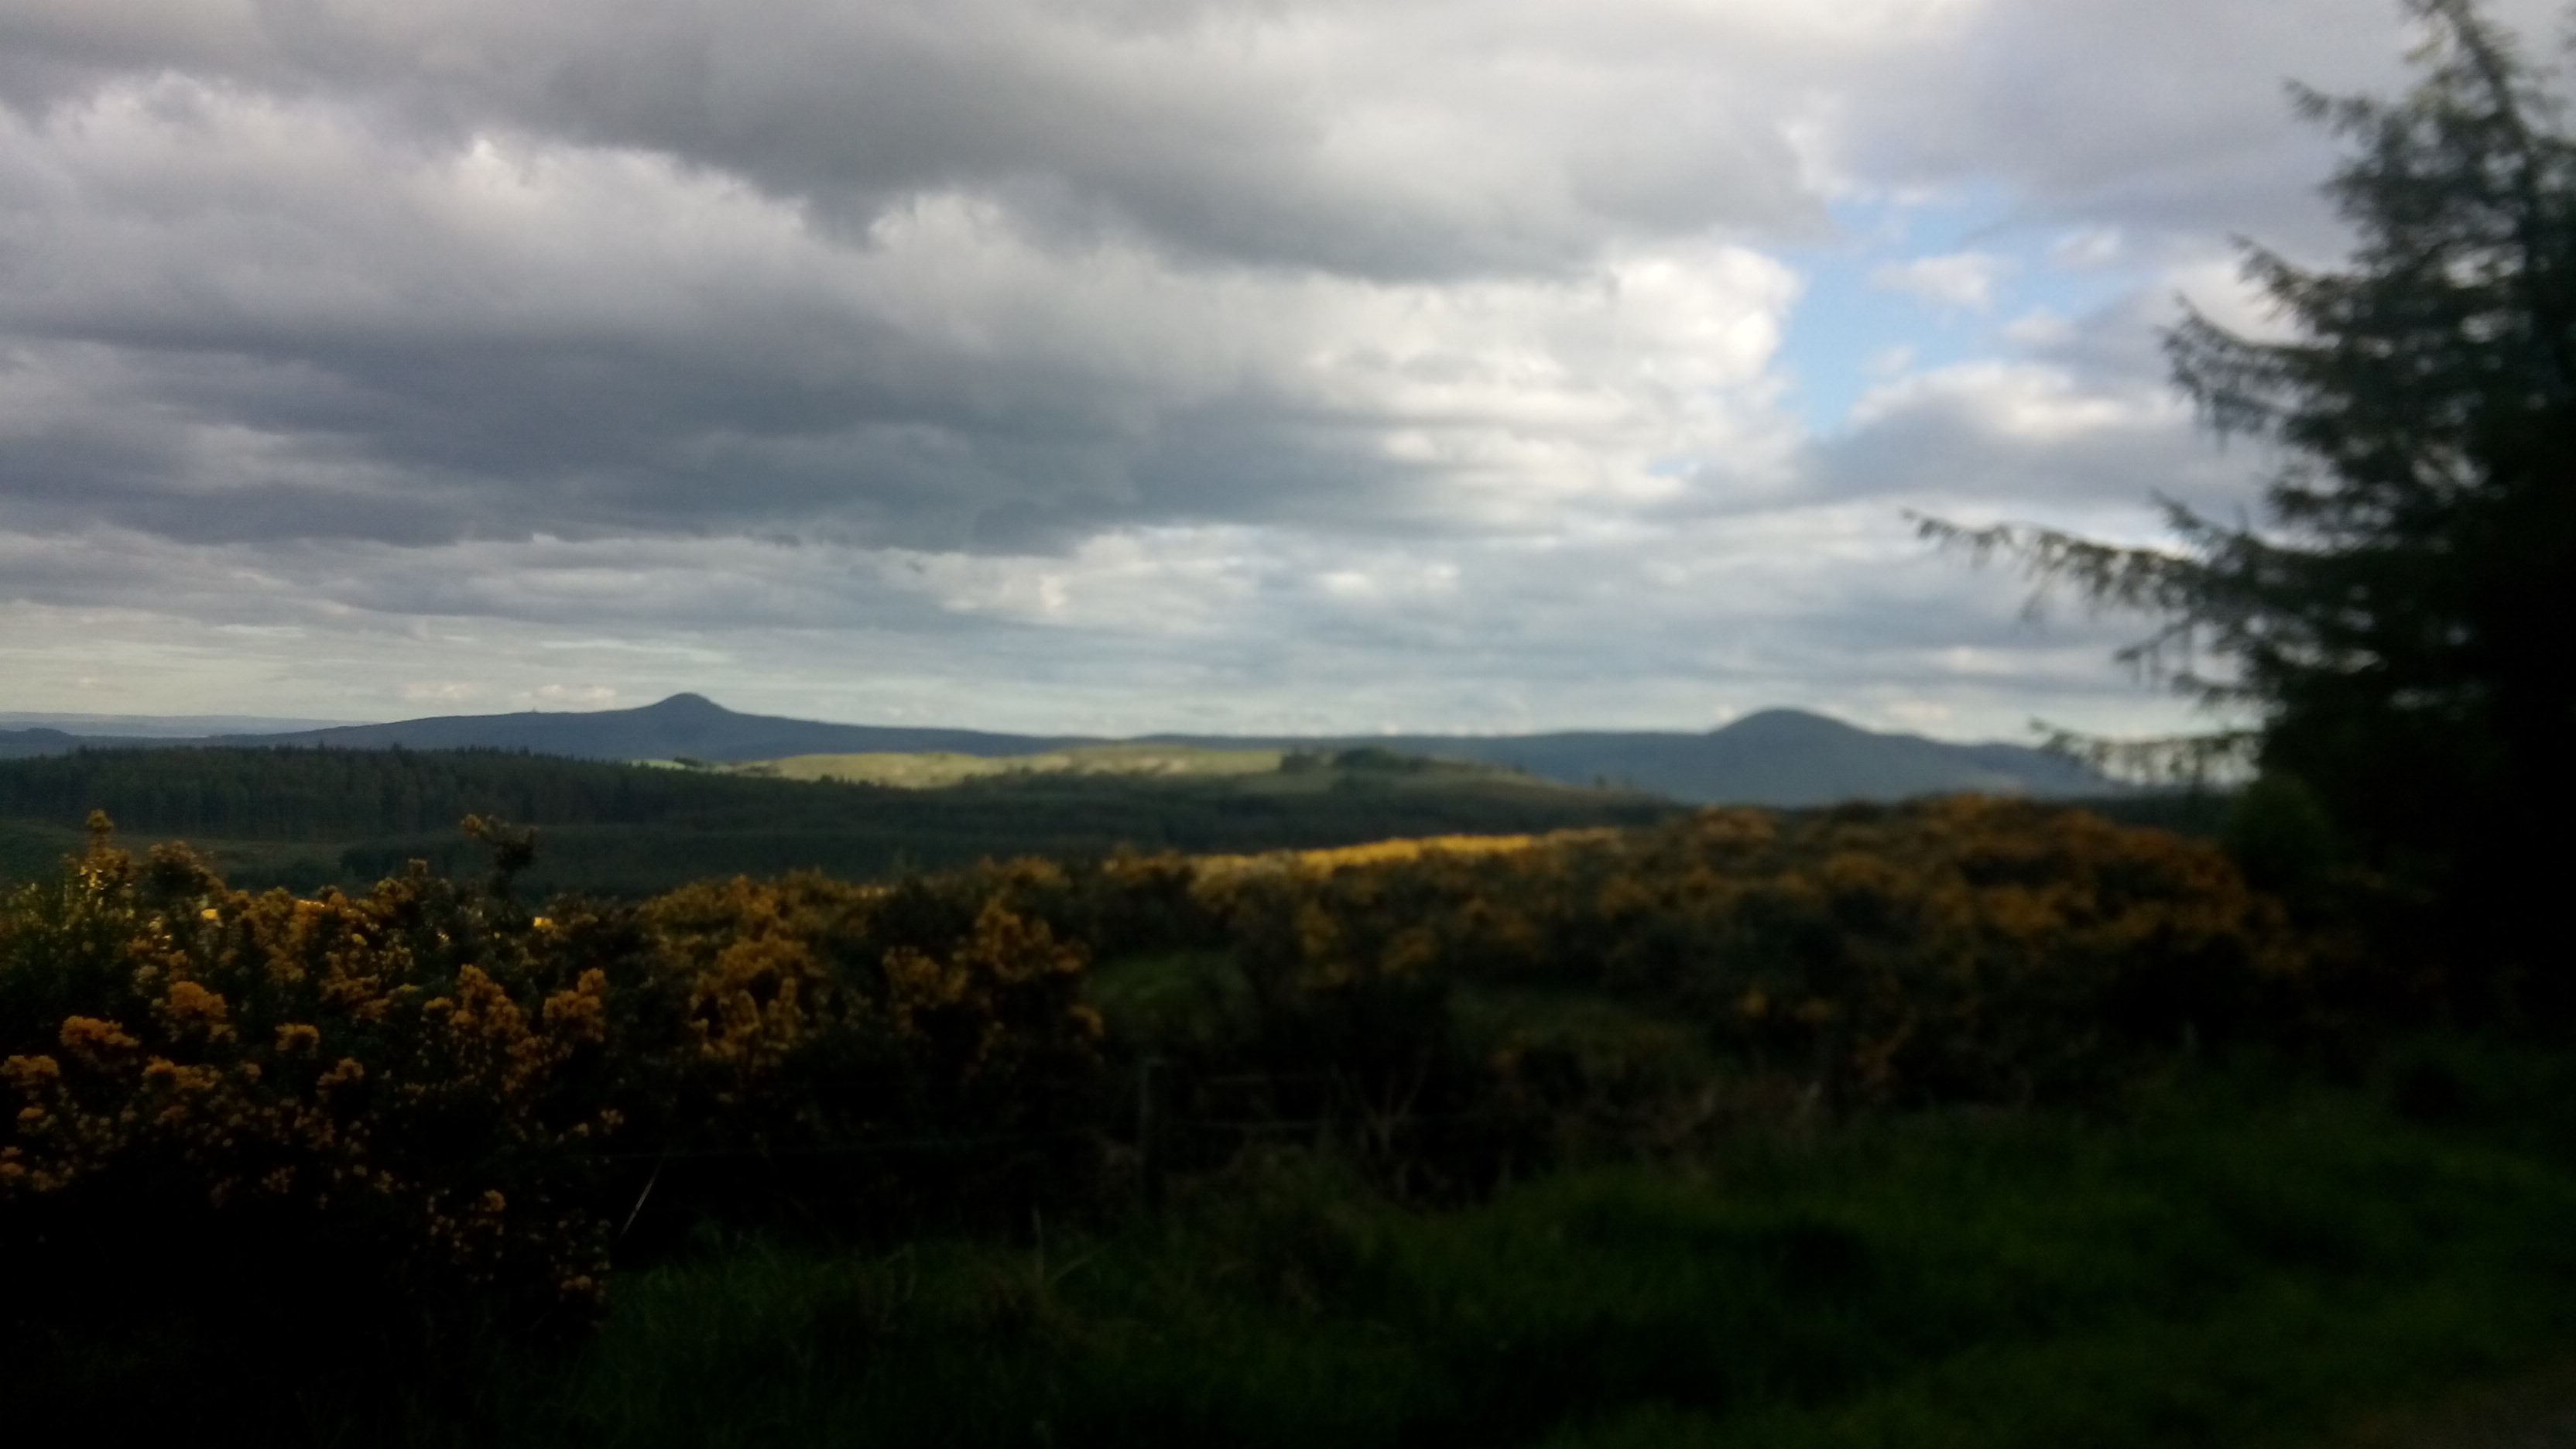 An evening view across flowering gorse and distant hills